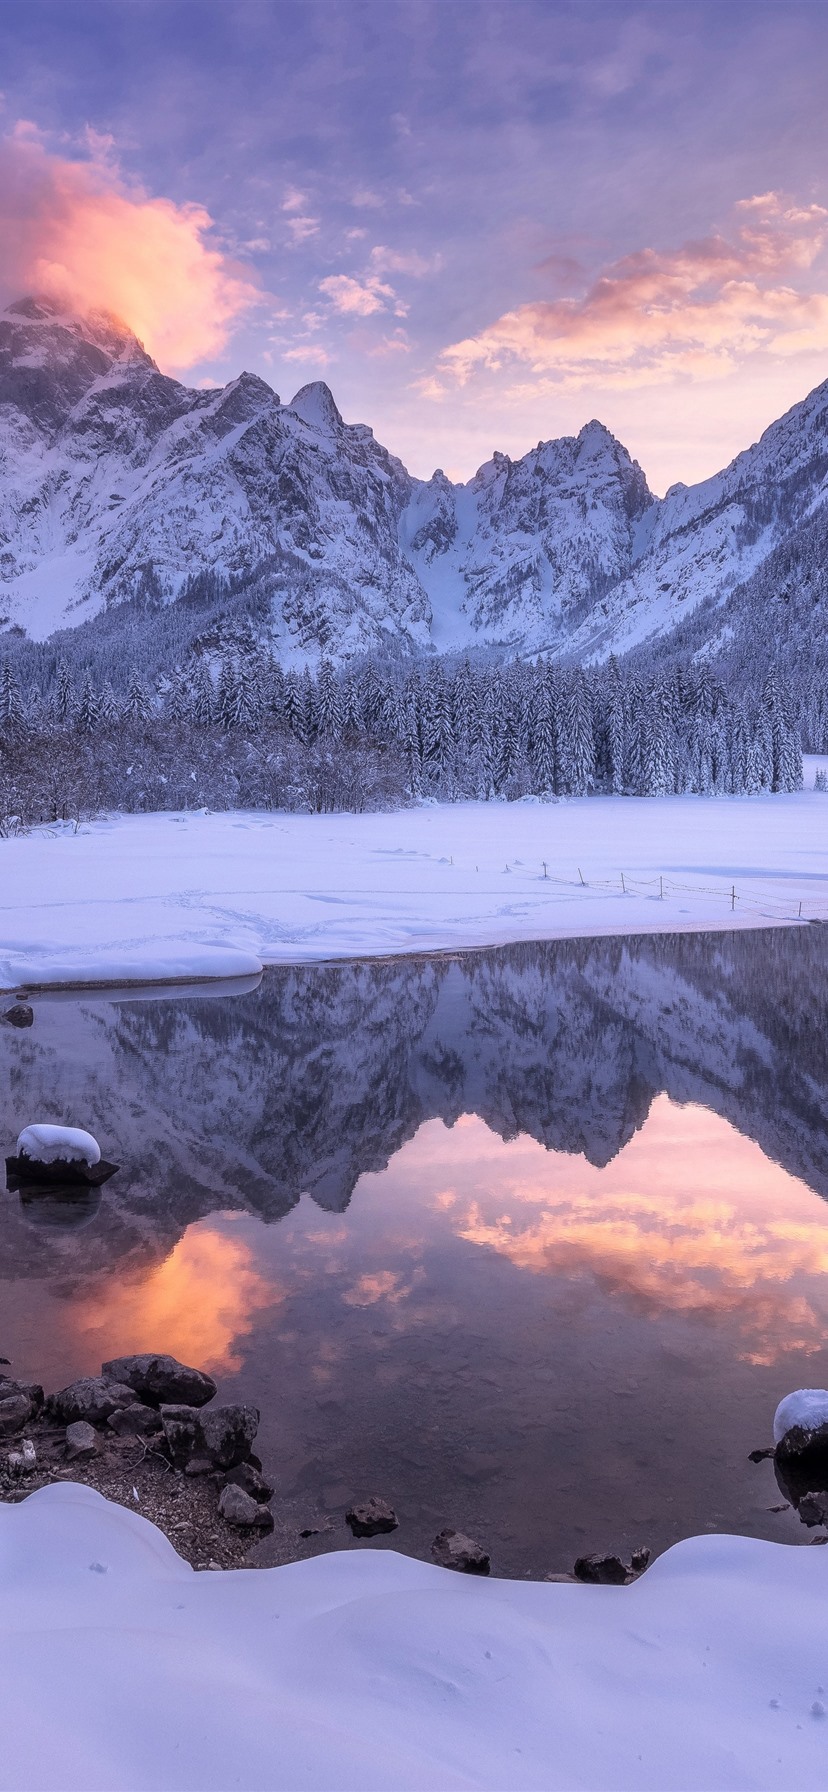 Beautiful Winter Nature Landscape, Snow, Lake, Mountains, Dusk 1242x2688 IPhone 11 Pro XS Max Wallpaper, Background, Picture, Image